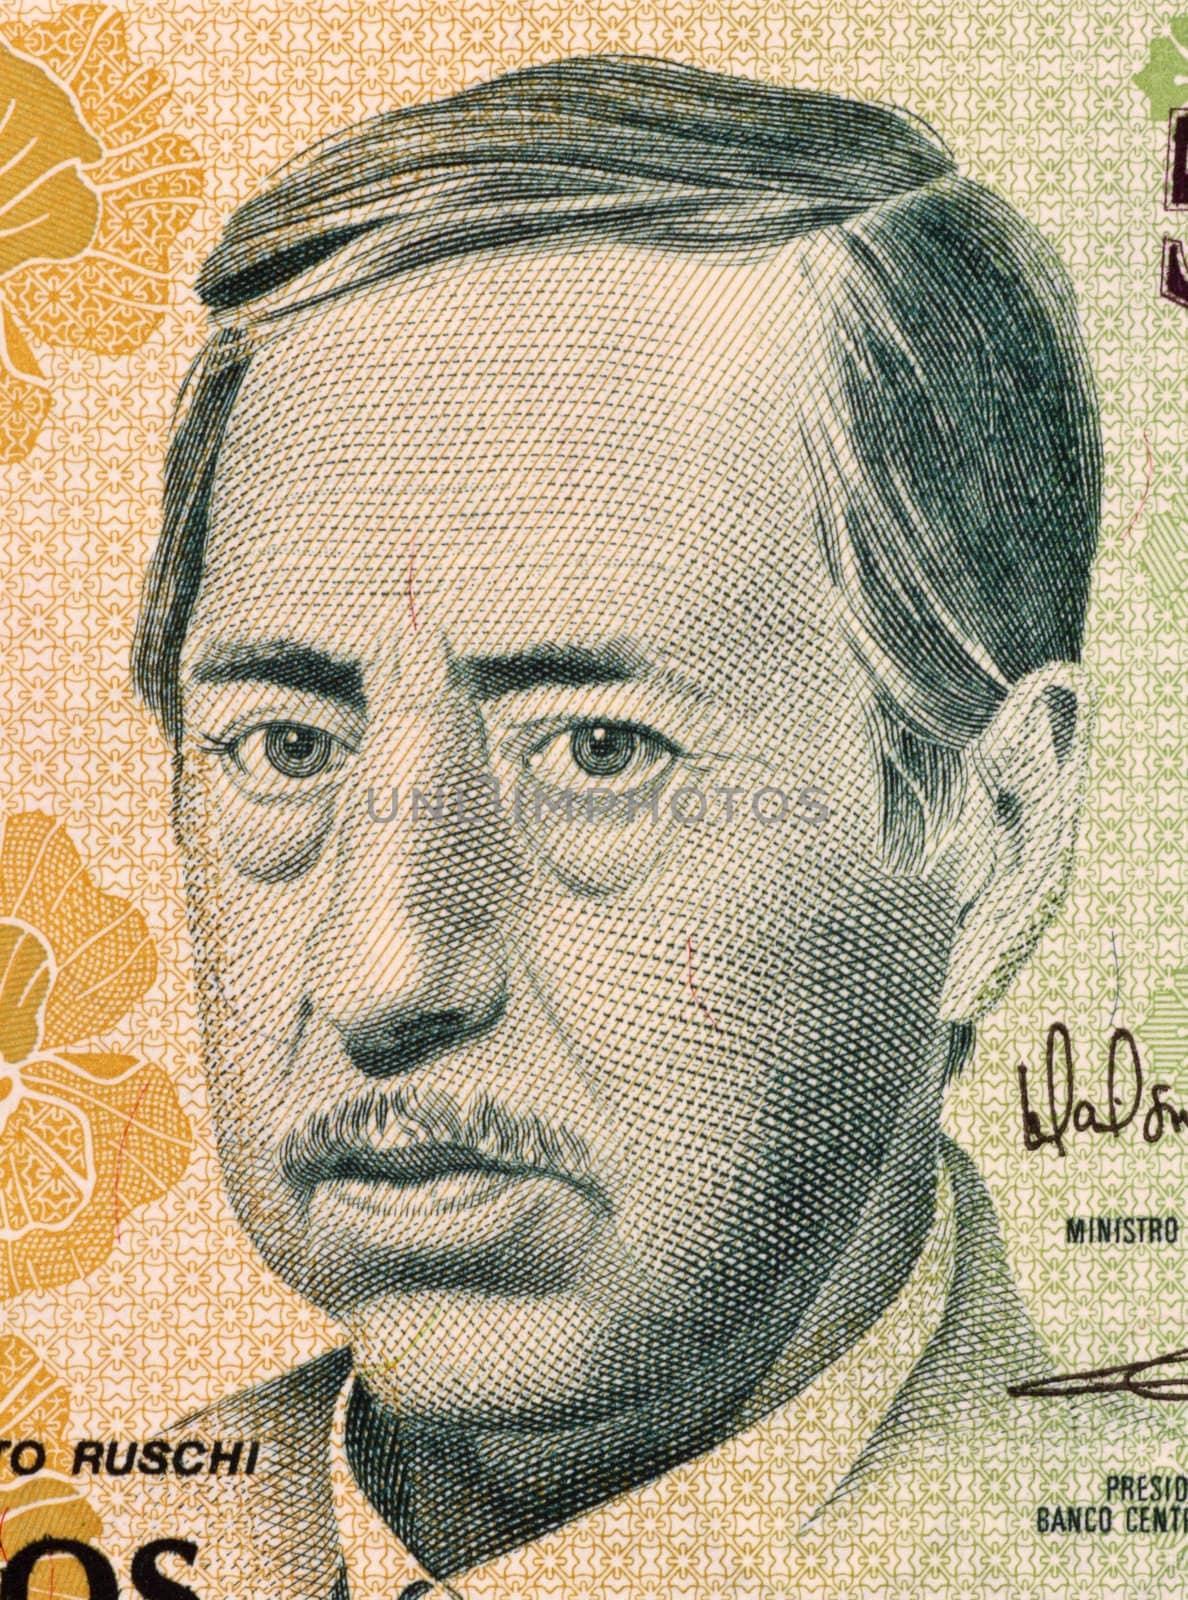 Augusto Ruschi on 500 Cruzados Novos 1990 Banknote from Brazil. Scientist, agronomist, naturalist, ecologist  and lawyer. Brazilian patron of ecology.